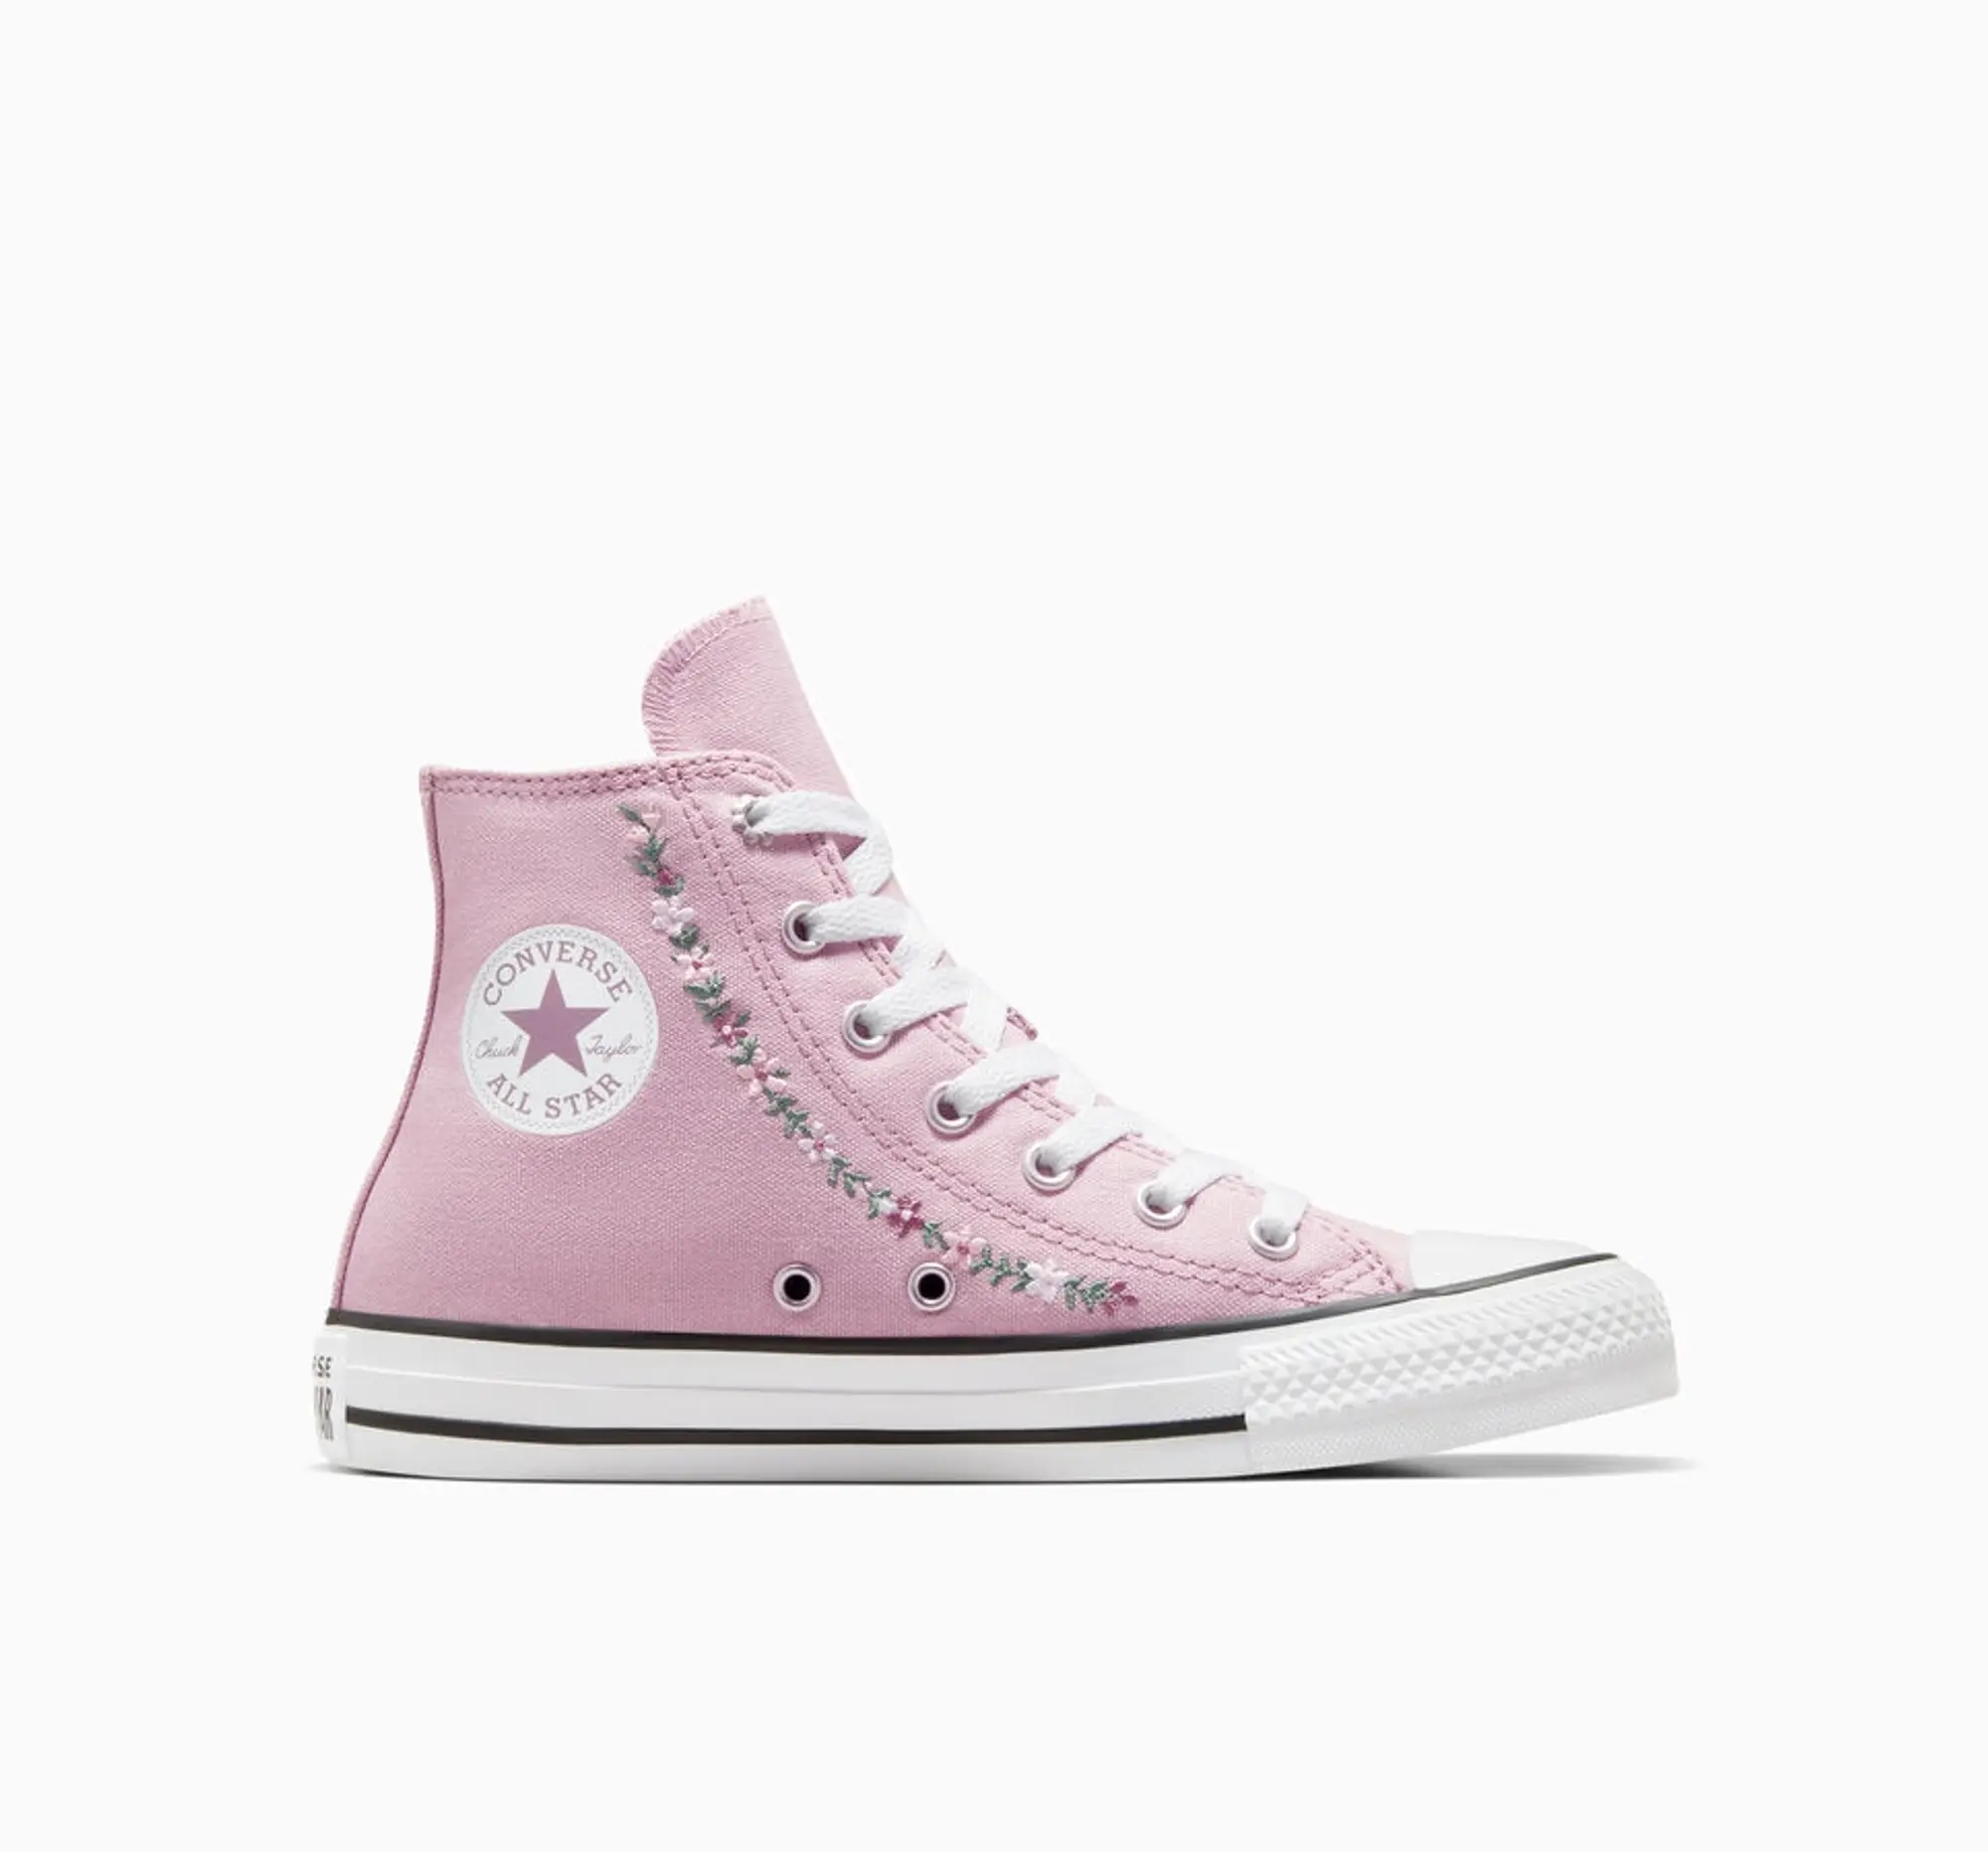 Converse Pale Pink All Star Hi Embroidered Floral Girls Youth Trainers